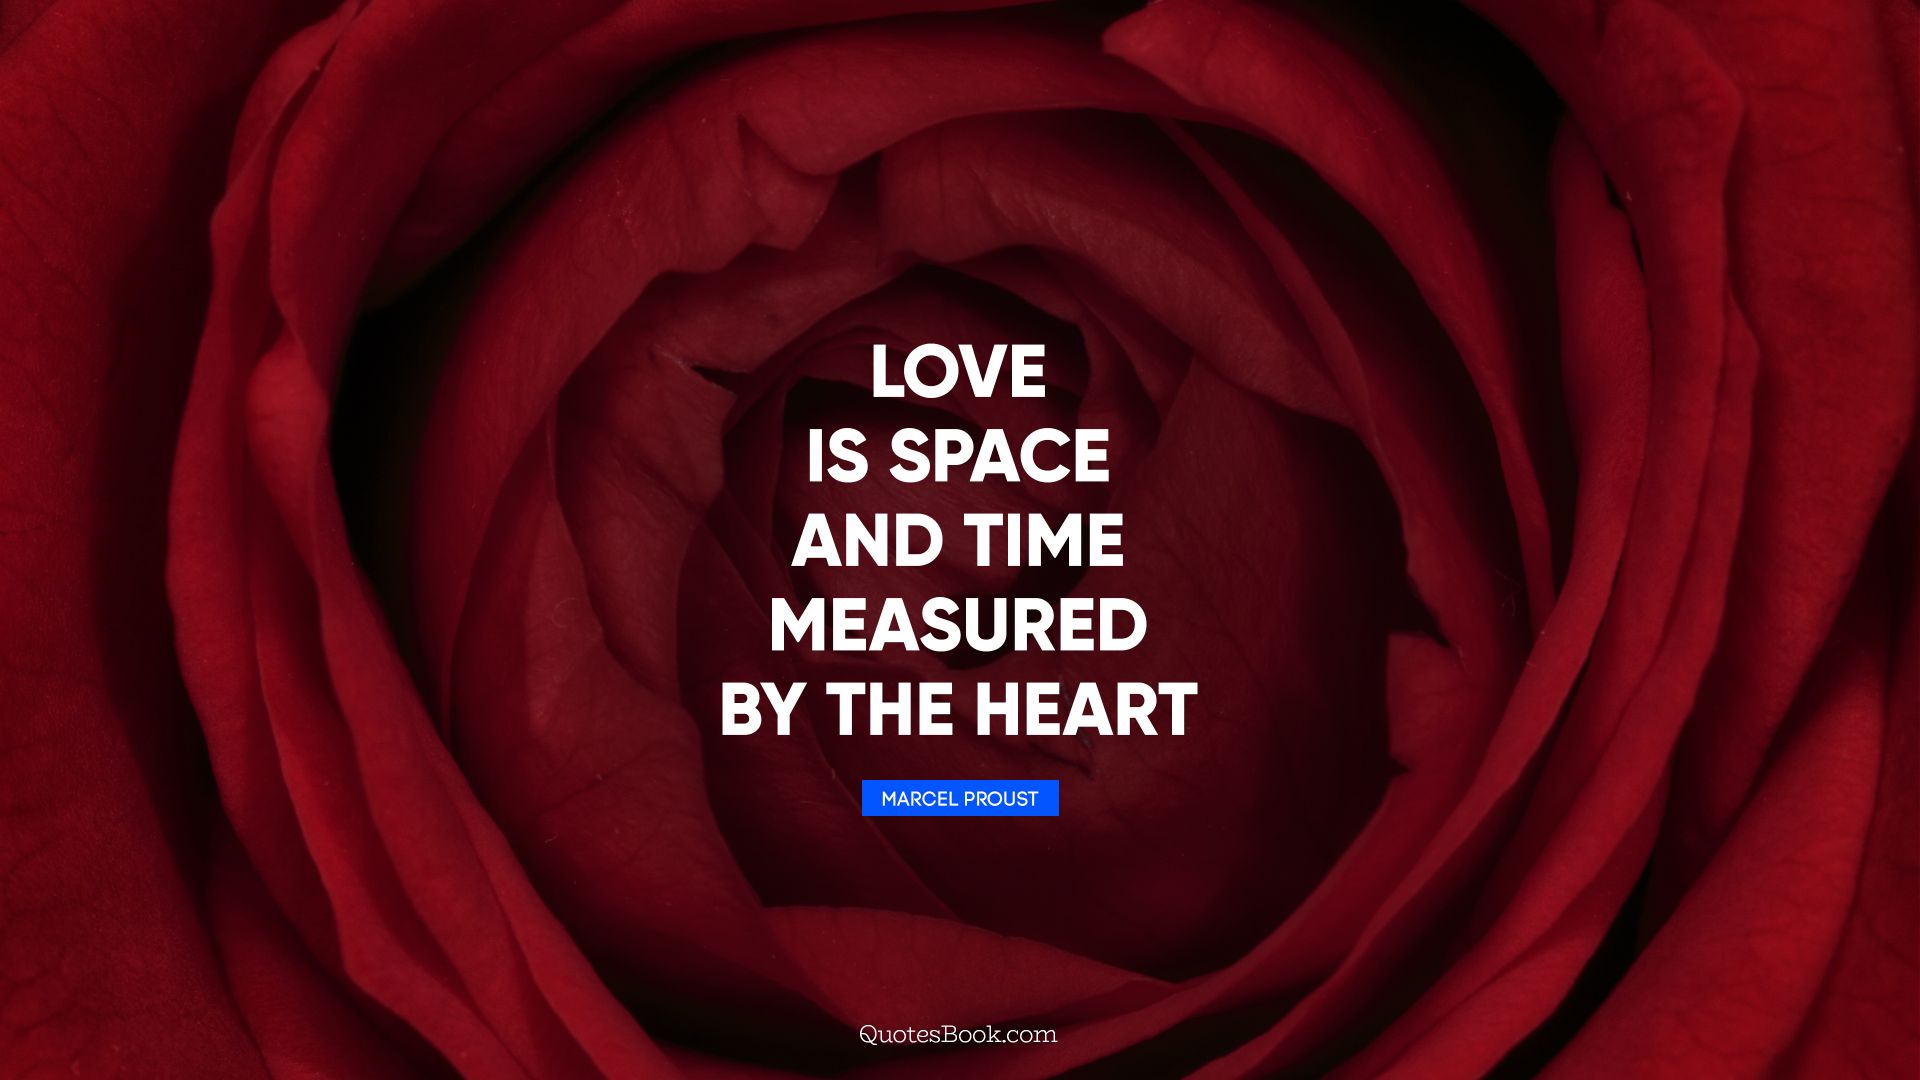 Love is space and time measured by the heart. - Quote by Marcel Proust